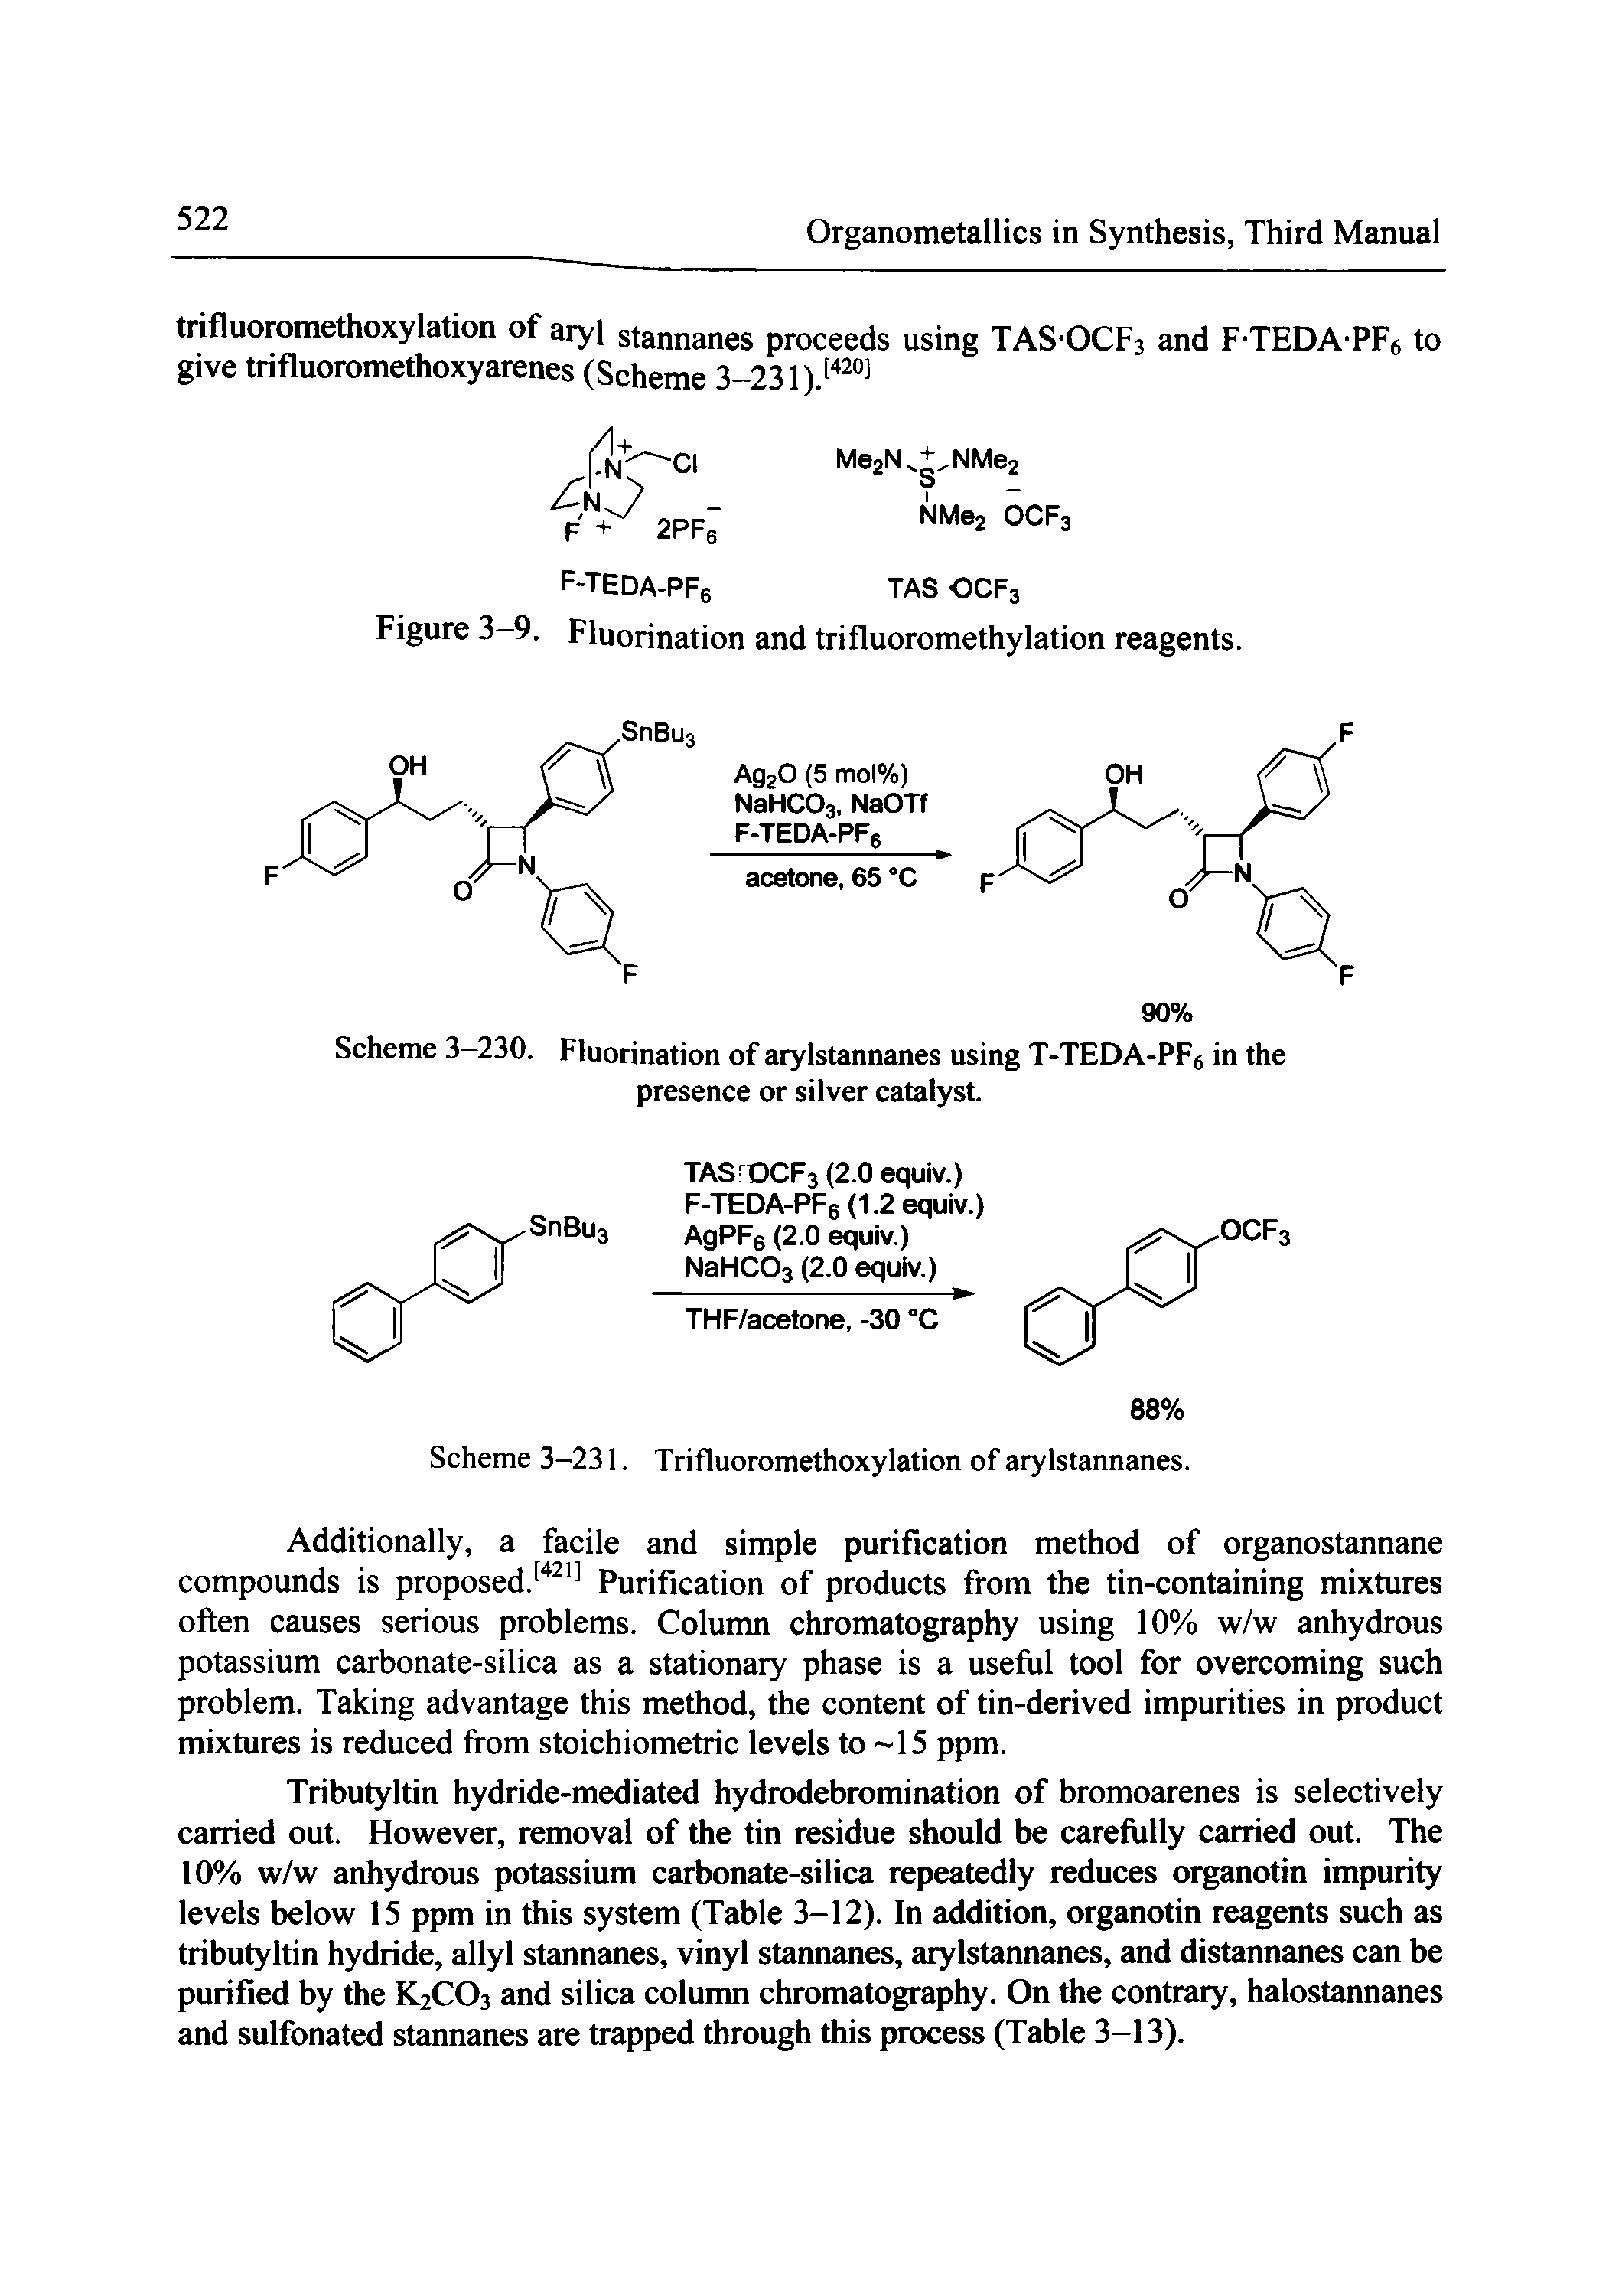 Scheme 3-230. Fluorination of arylstannanes using T-TEDA-PFe in the presence or silver catalyst.